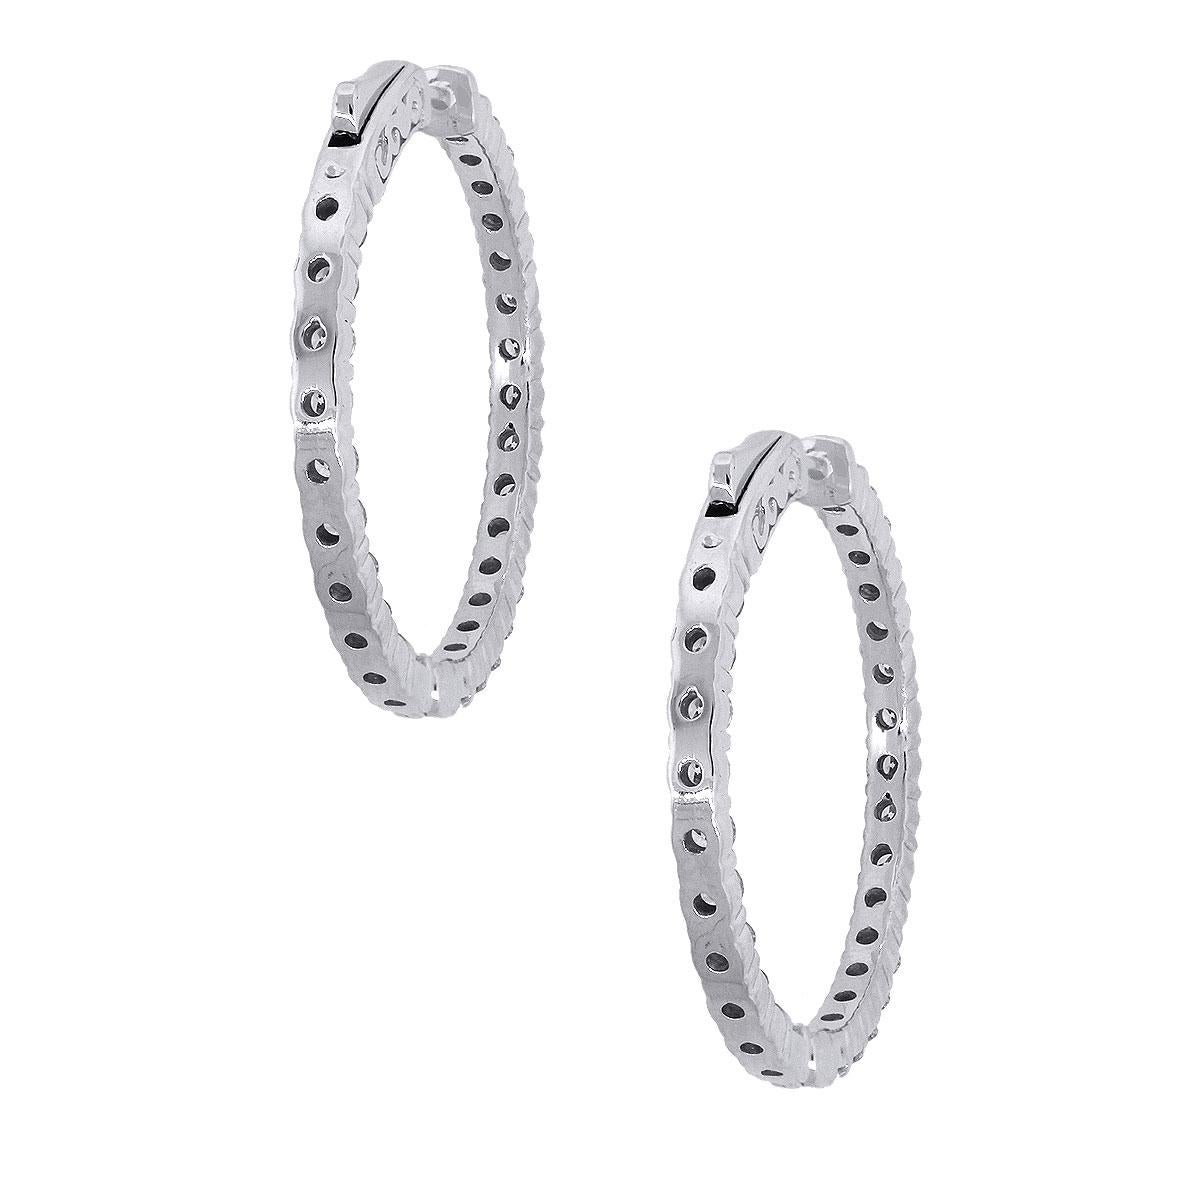 Material: 14k white Gold
Style: Diamond Inside Out Hoops
Diamond Details: Approximately 2.87ctw of round brilliant diamonds. Diamonds are G/H in color and SI in clarity.
Earring Measurements: 1.25″ x 0.11″ x 1.25″
Total Weight: 9.5g (6.1dwt)
Earring